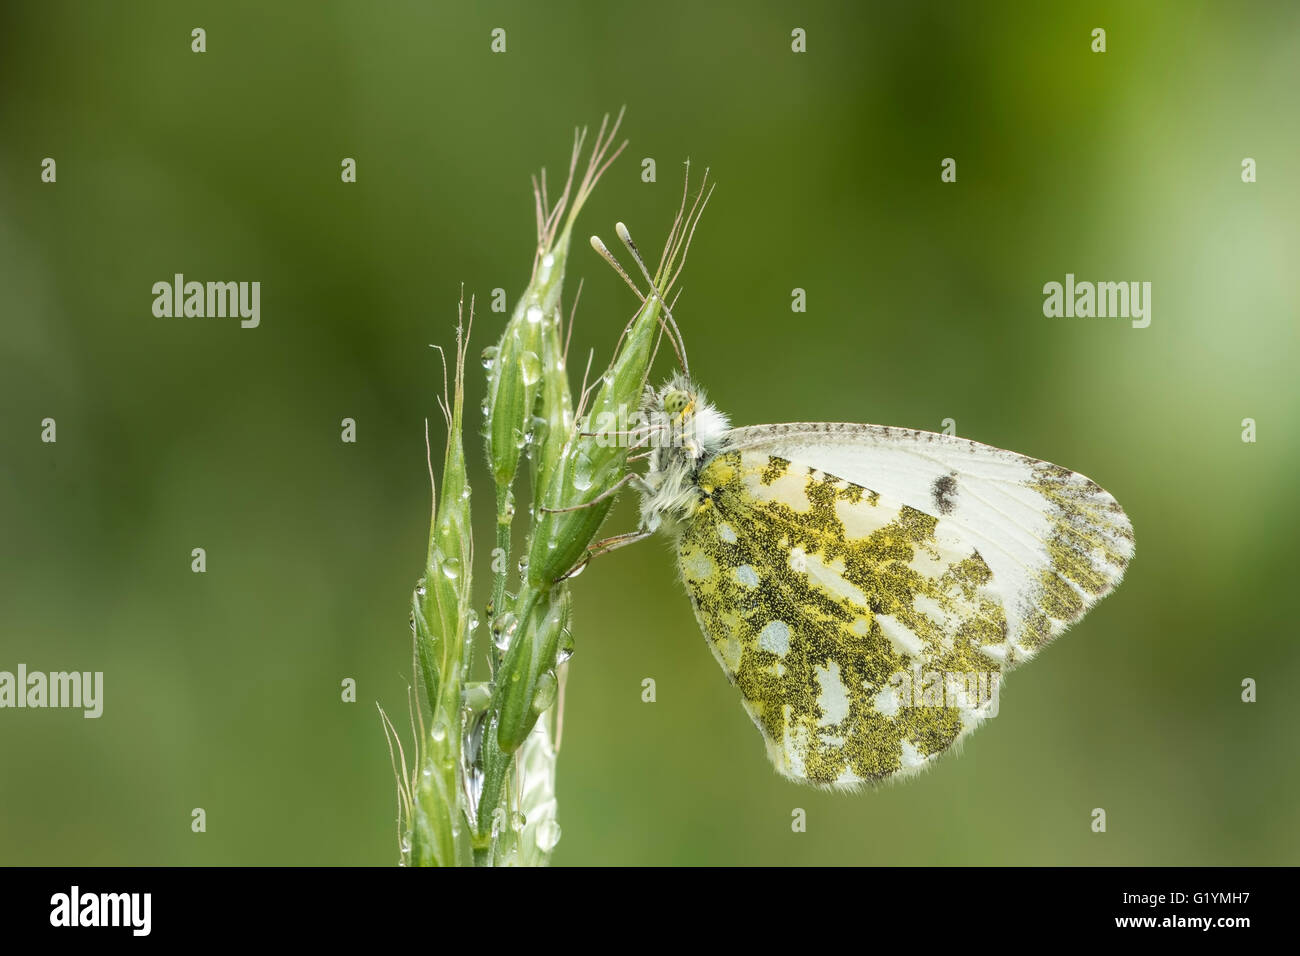 Side view close-up of a Female Orange tip butterfly (anthocharis cardamines) resting in a meadow during spring season Stock Photo